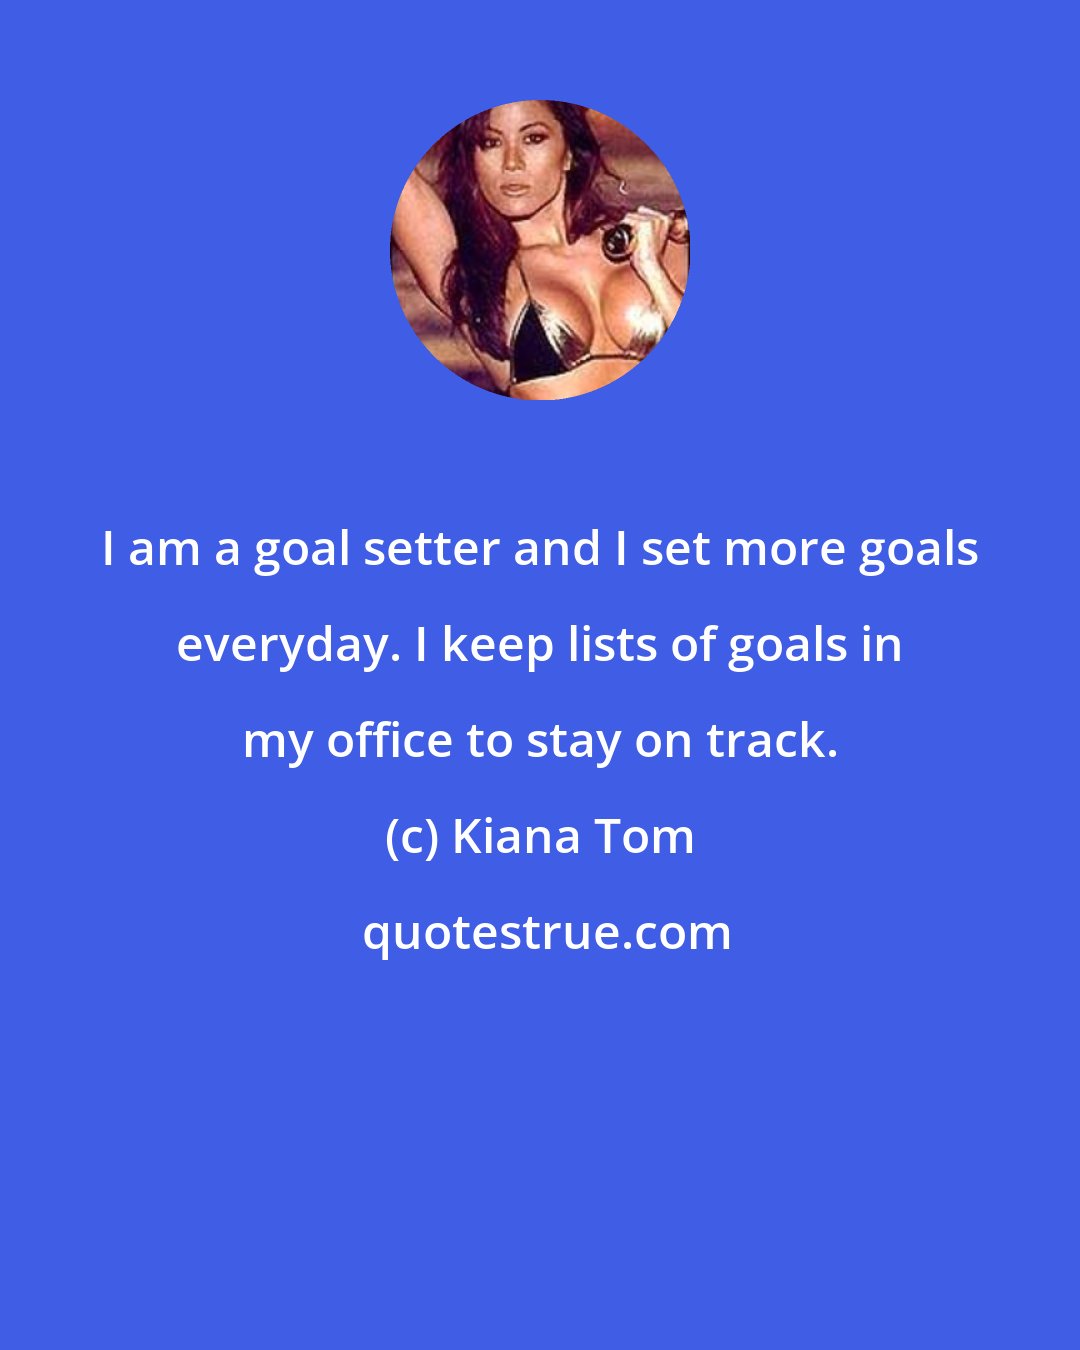 Kiana Tom: I am a goal setter and I set more goals everyday. I keep lists of goals in my office to stay on track.